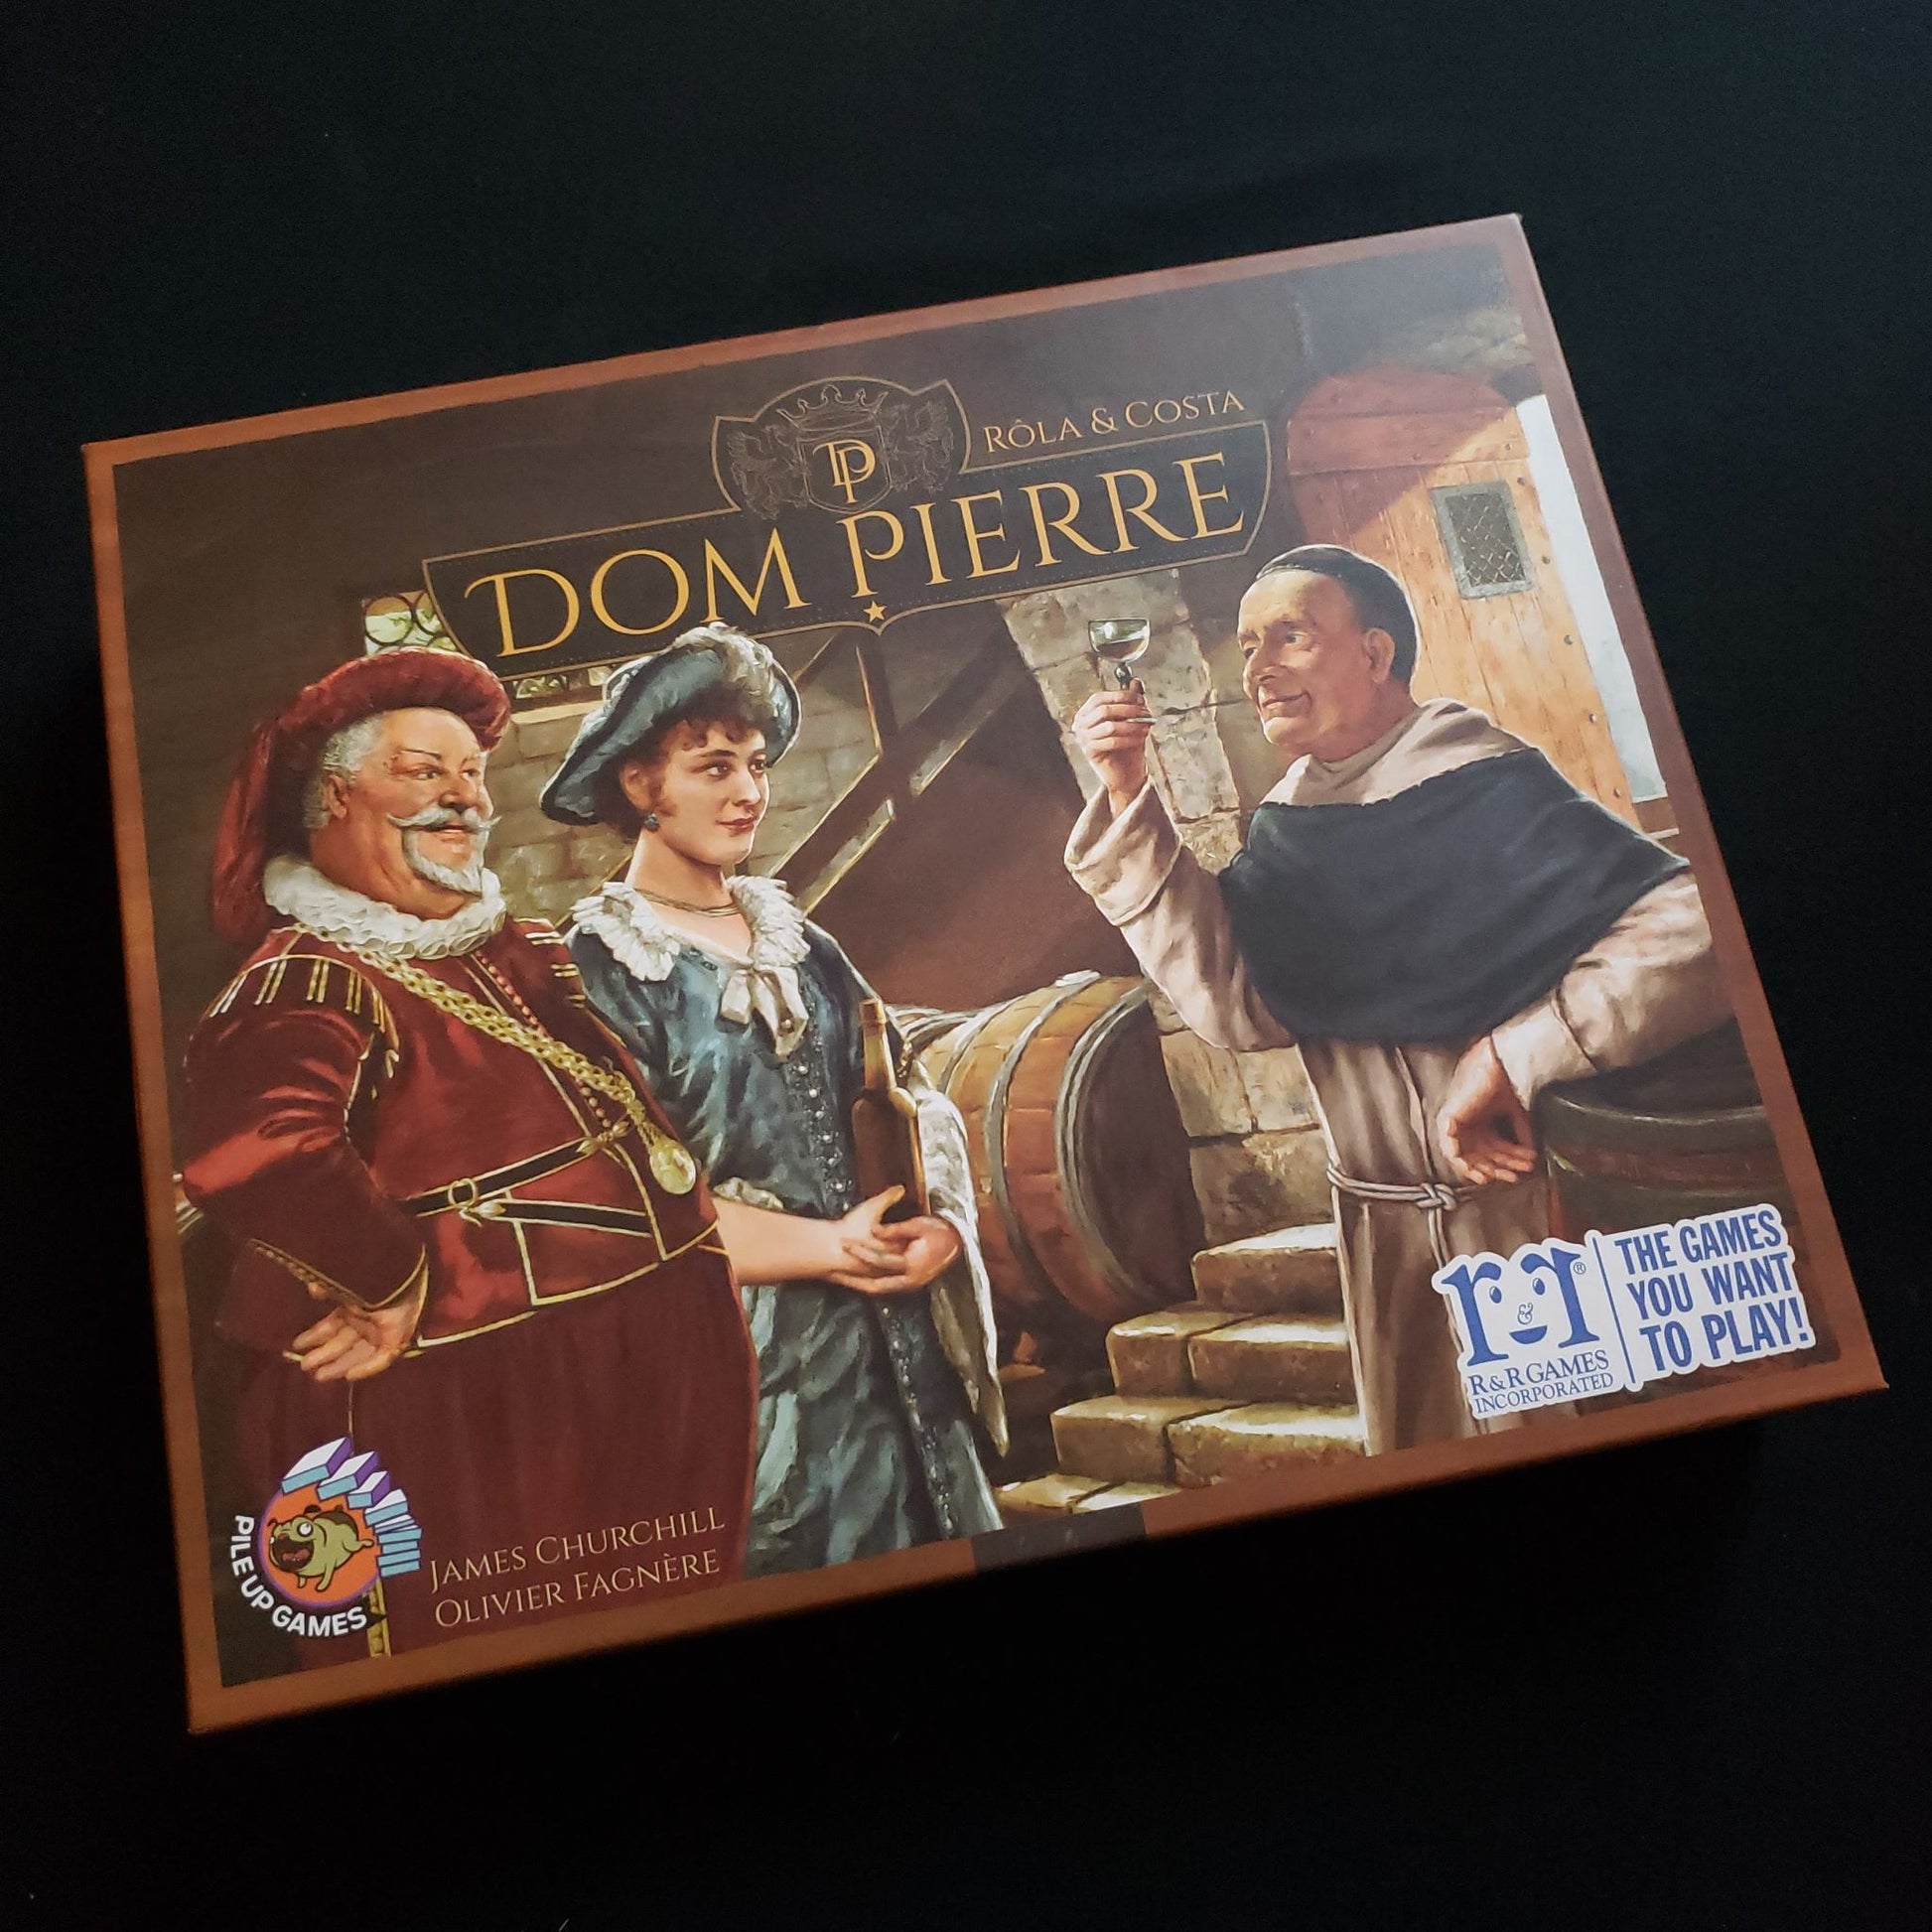 Dom Pierre board game - front cover of box